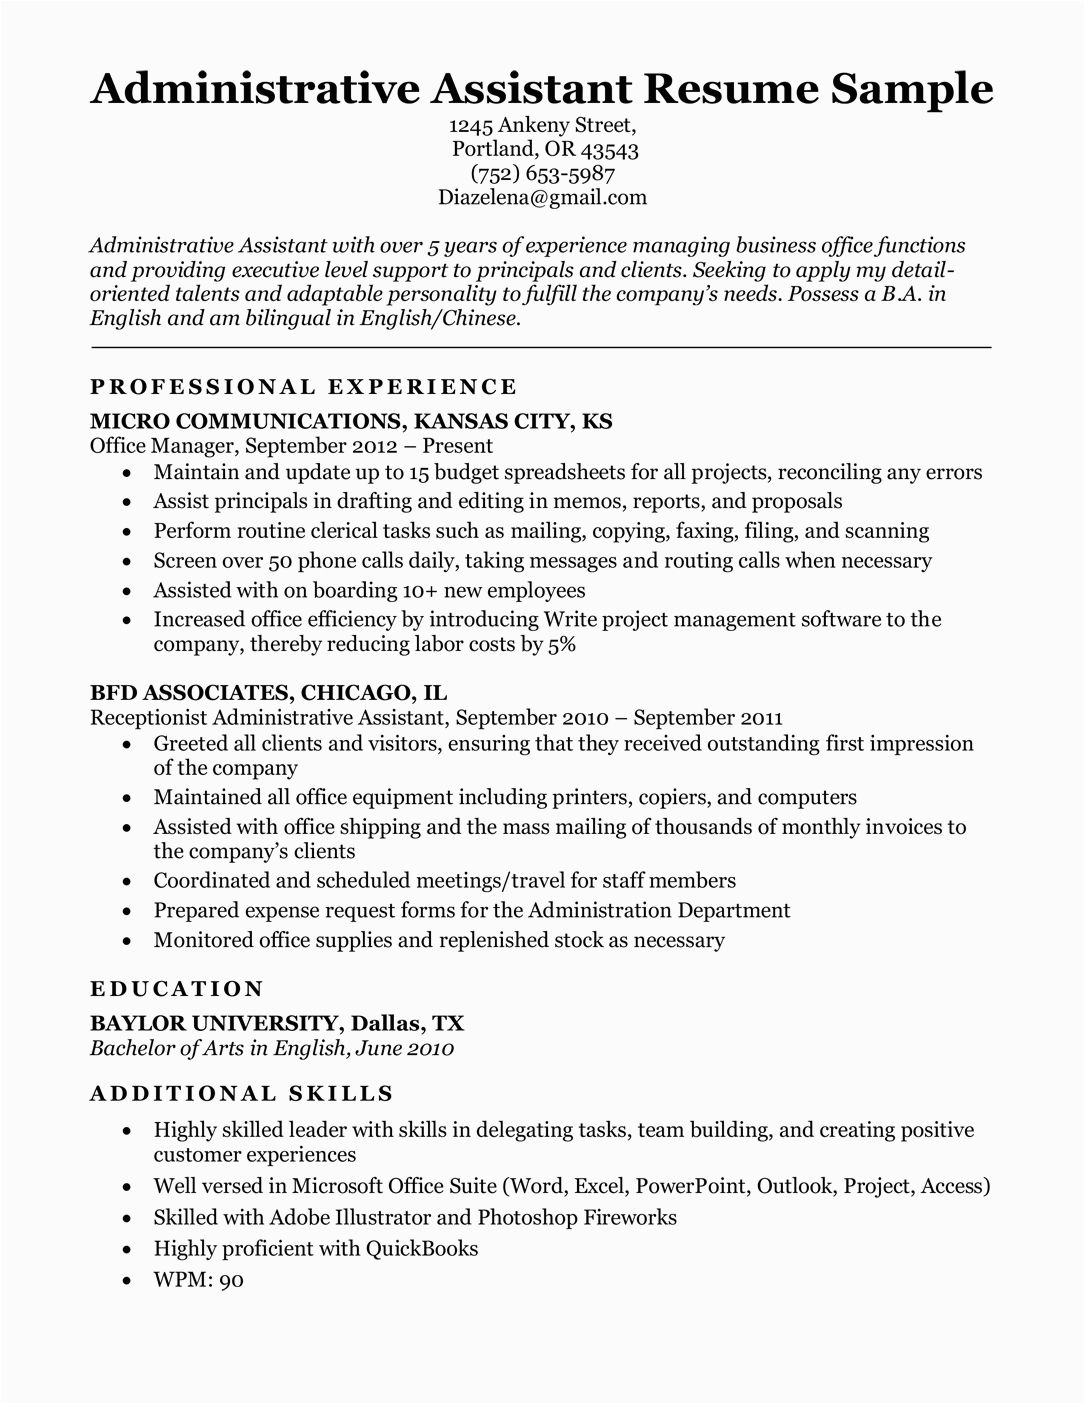 Sample Professional Resume for Administrative assistant Administrative assistant Resume Example